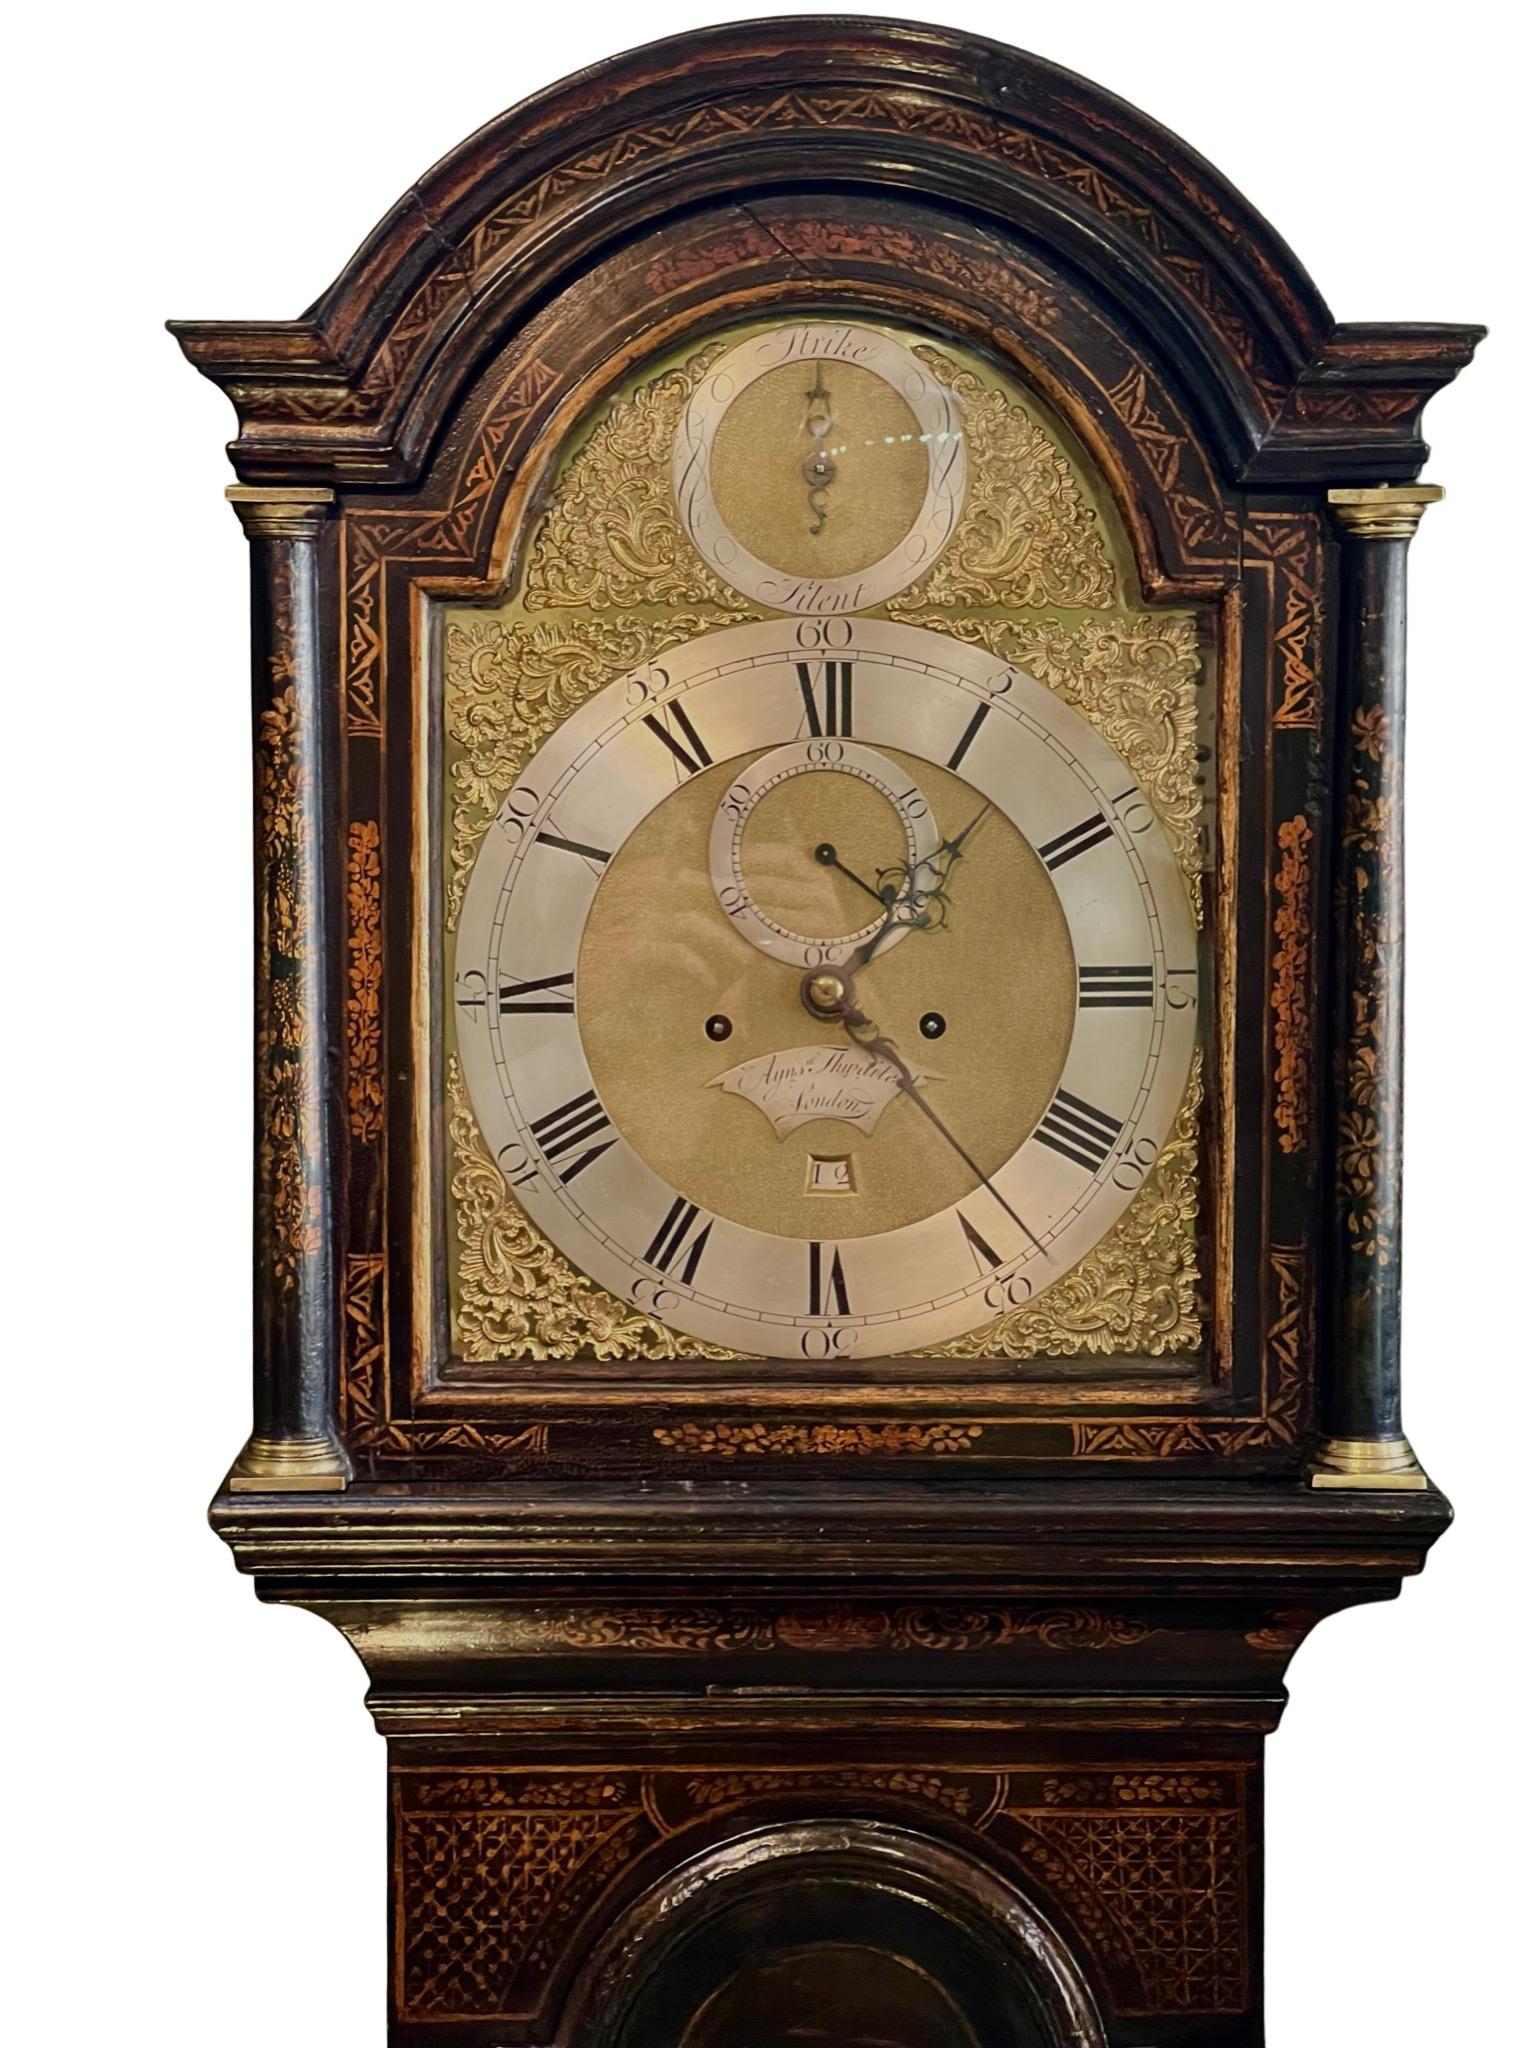 A stunning George II 8 Day Striking Japanned Longcase Clock by James Tregent, Leicester Square, London

James Tregent was Clock and Watchmaker to the Prince of Wales. The Banks Collection advertises 